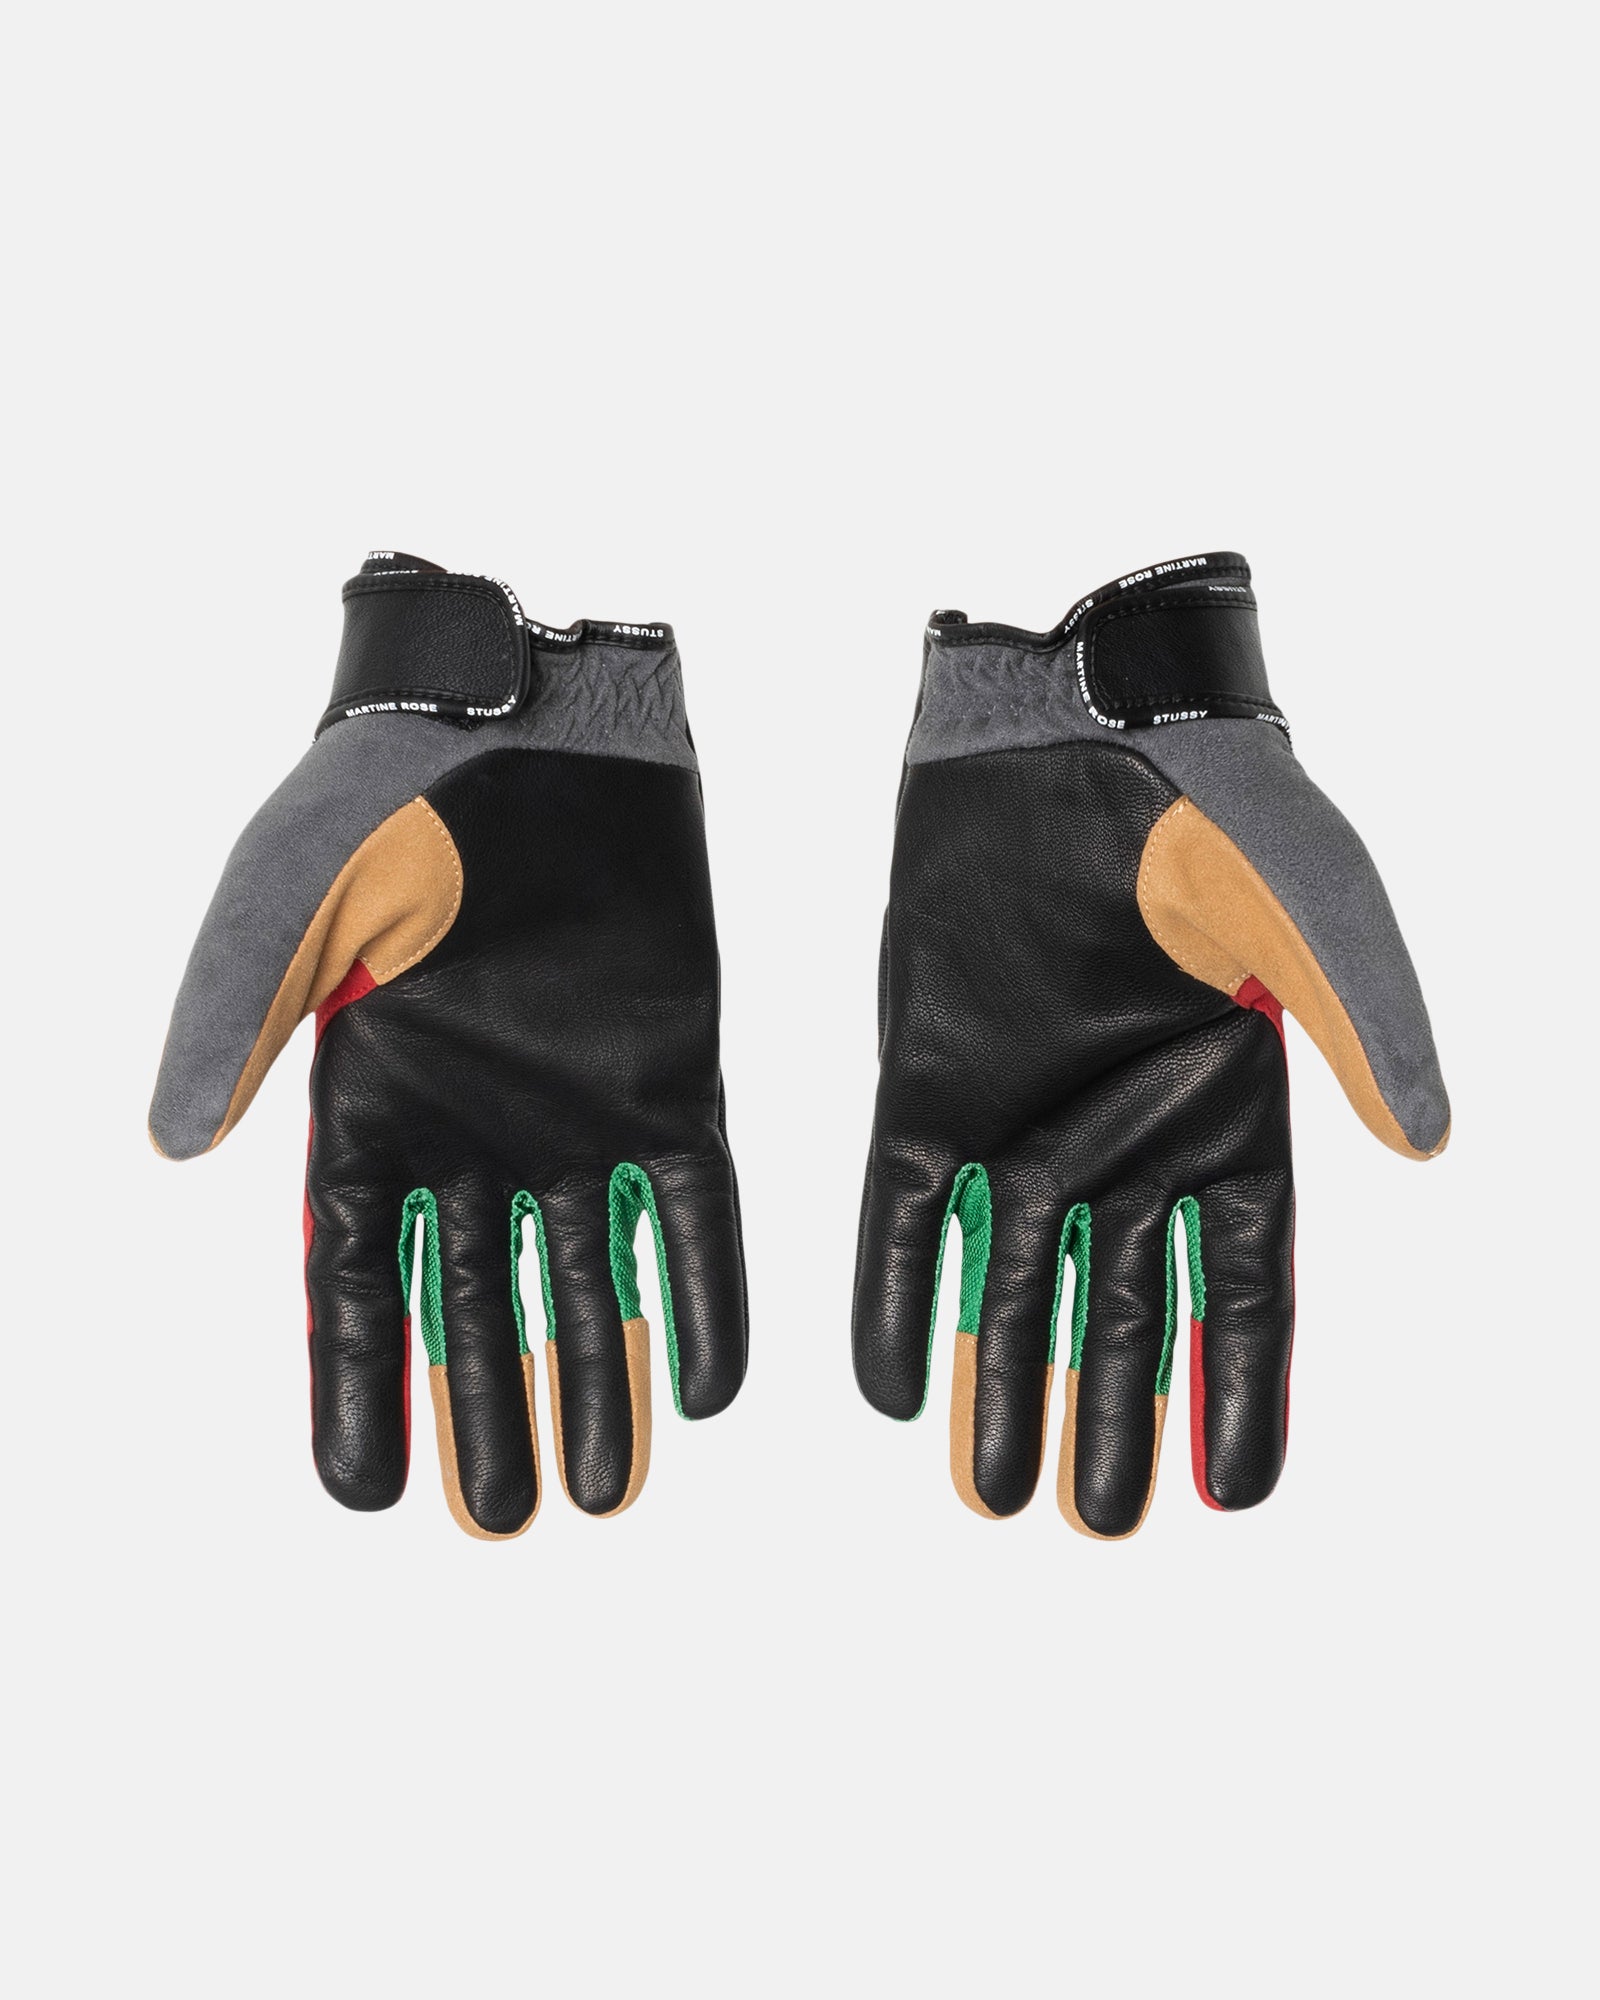 Stüssy & Martine Rose Driving Gloves - Accessories & Home Goods